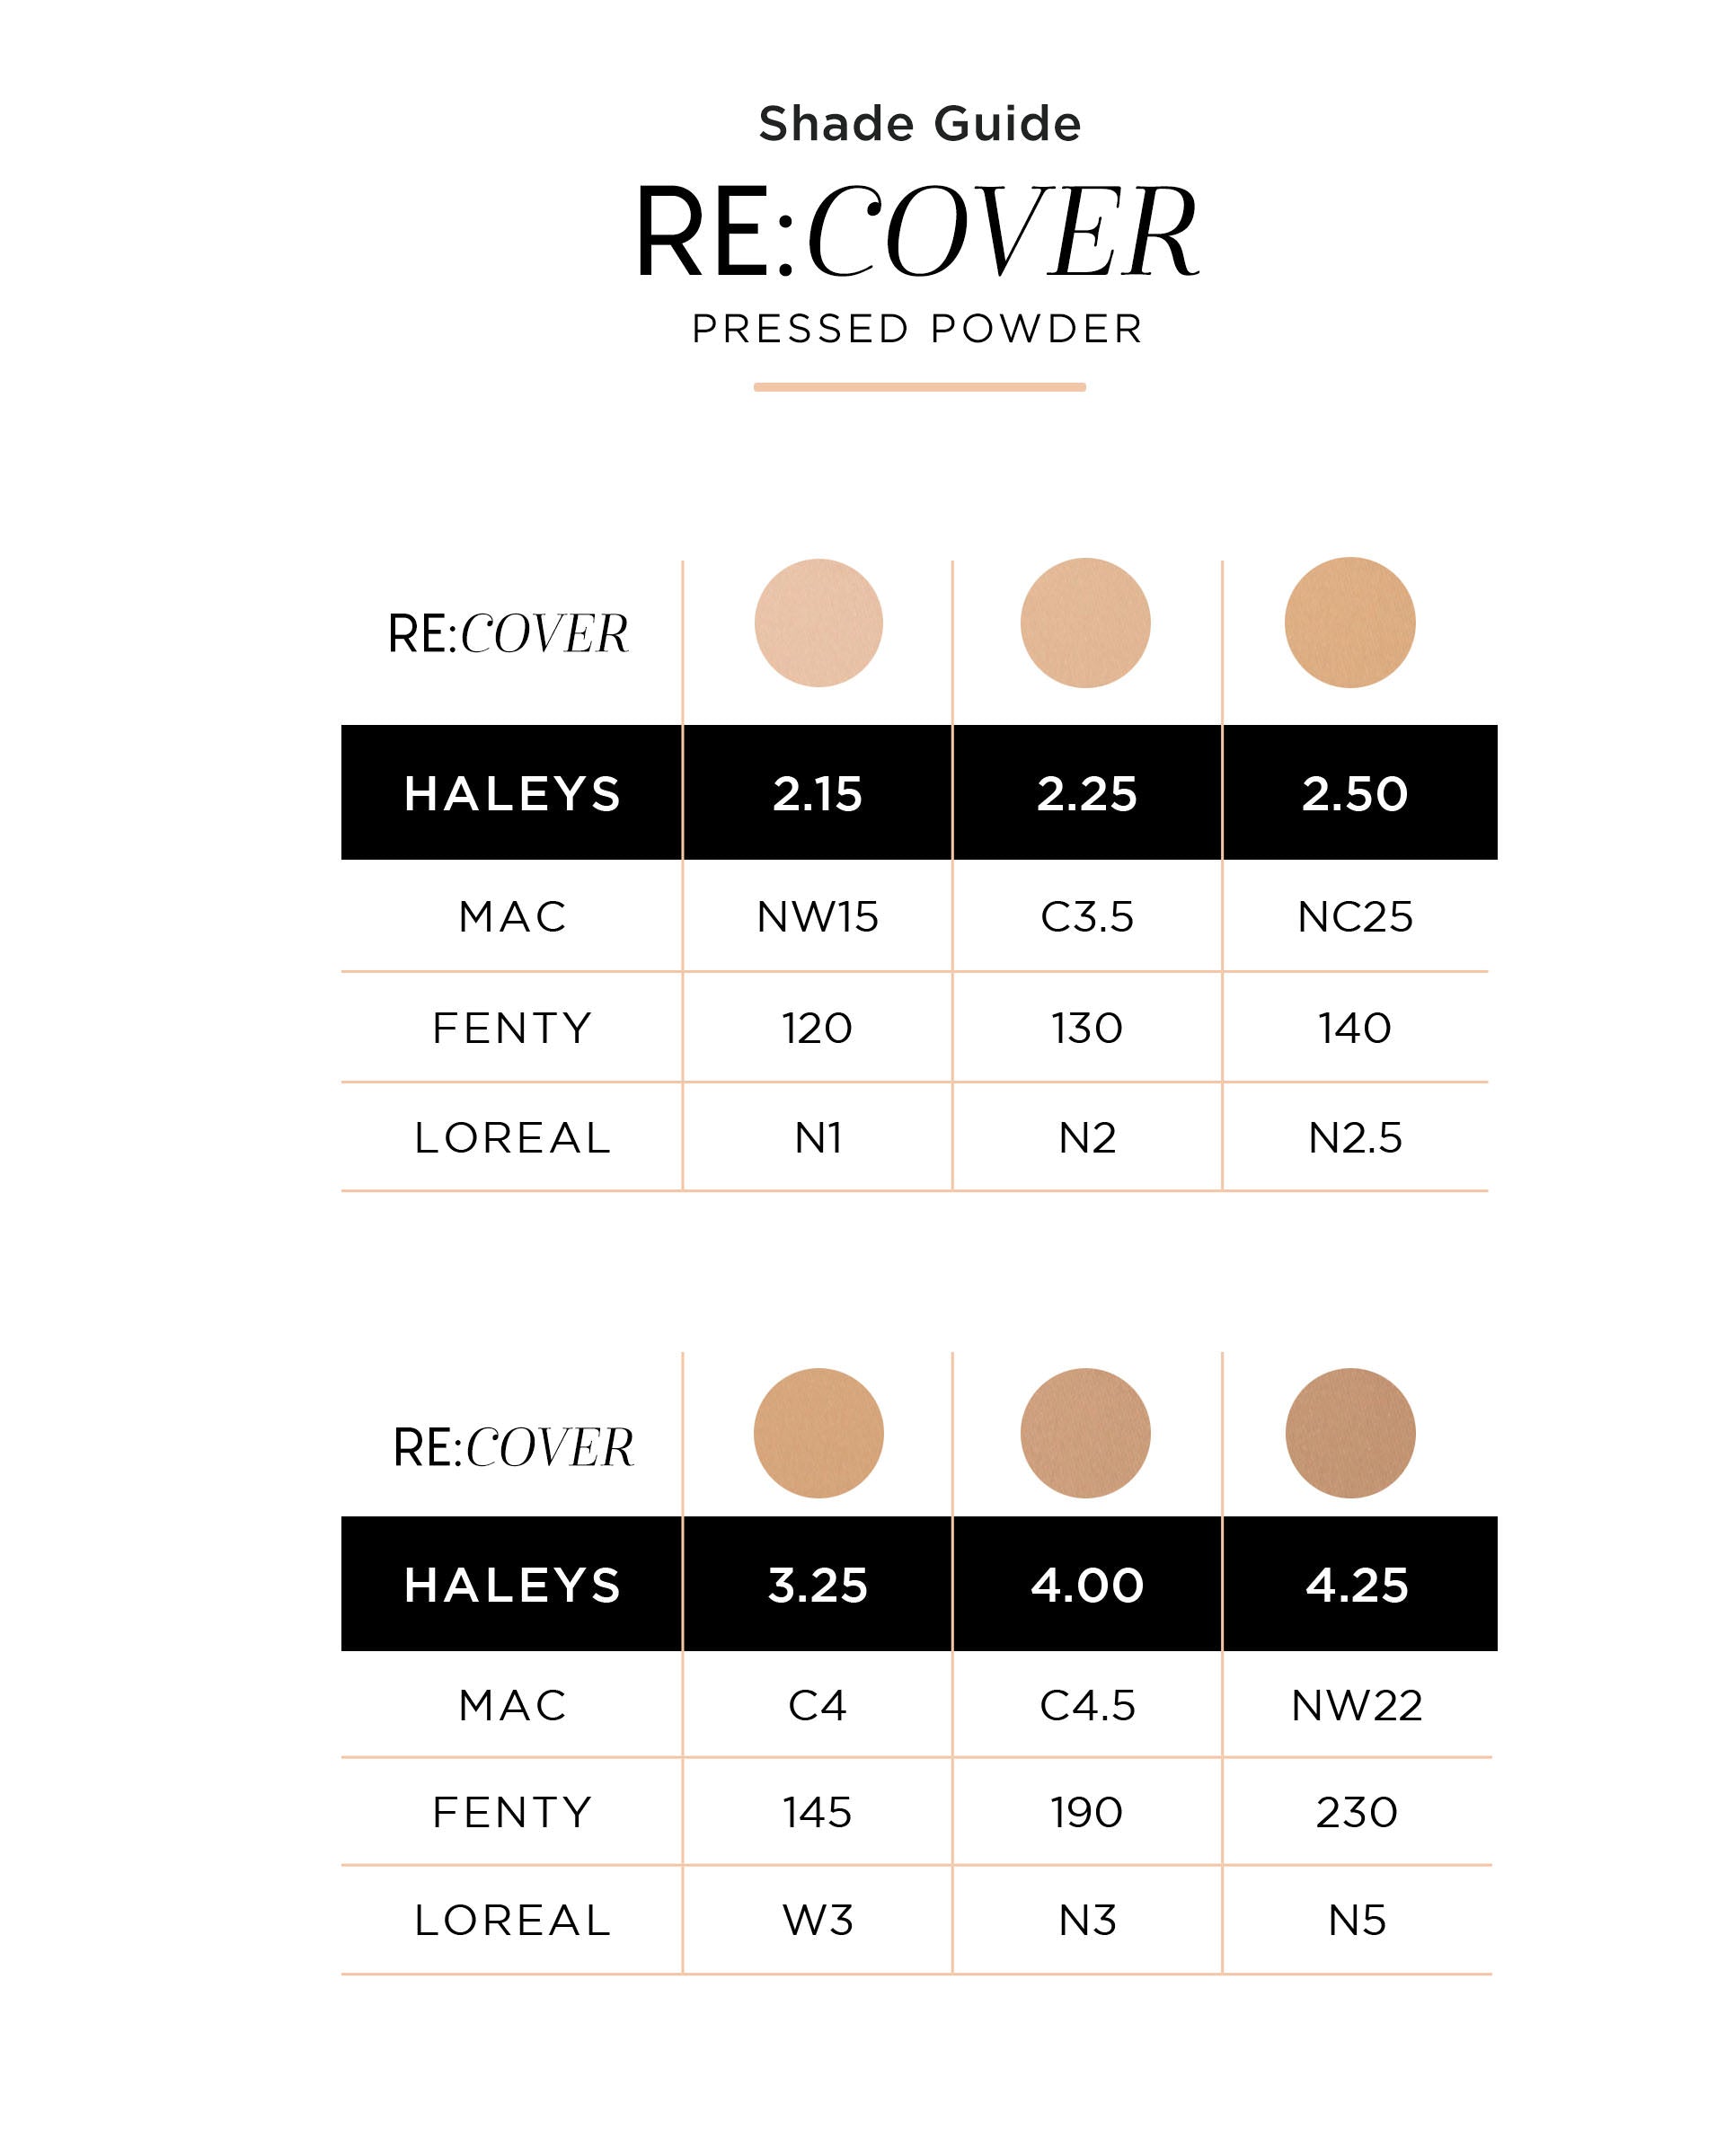 RE:COVER Pressed Powder